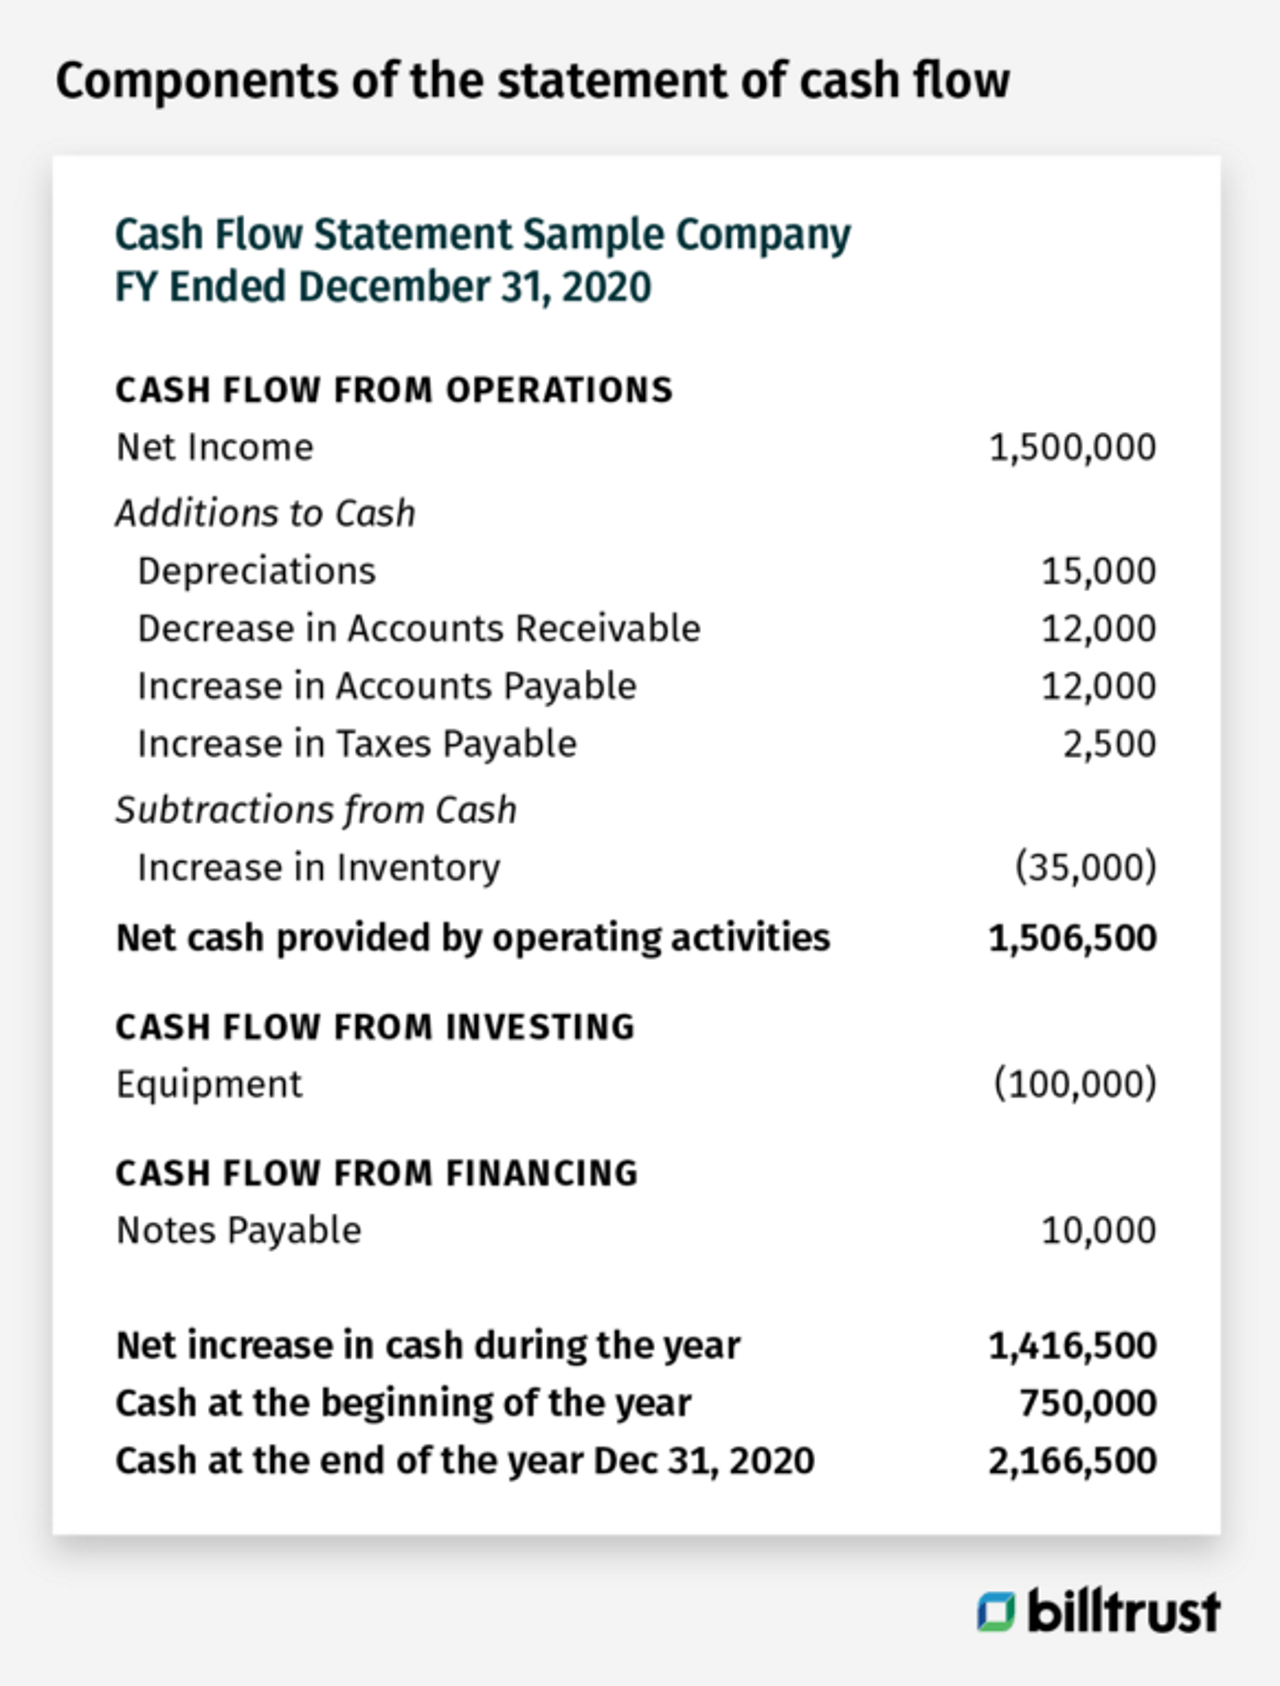 example of components of statement of cash flow